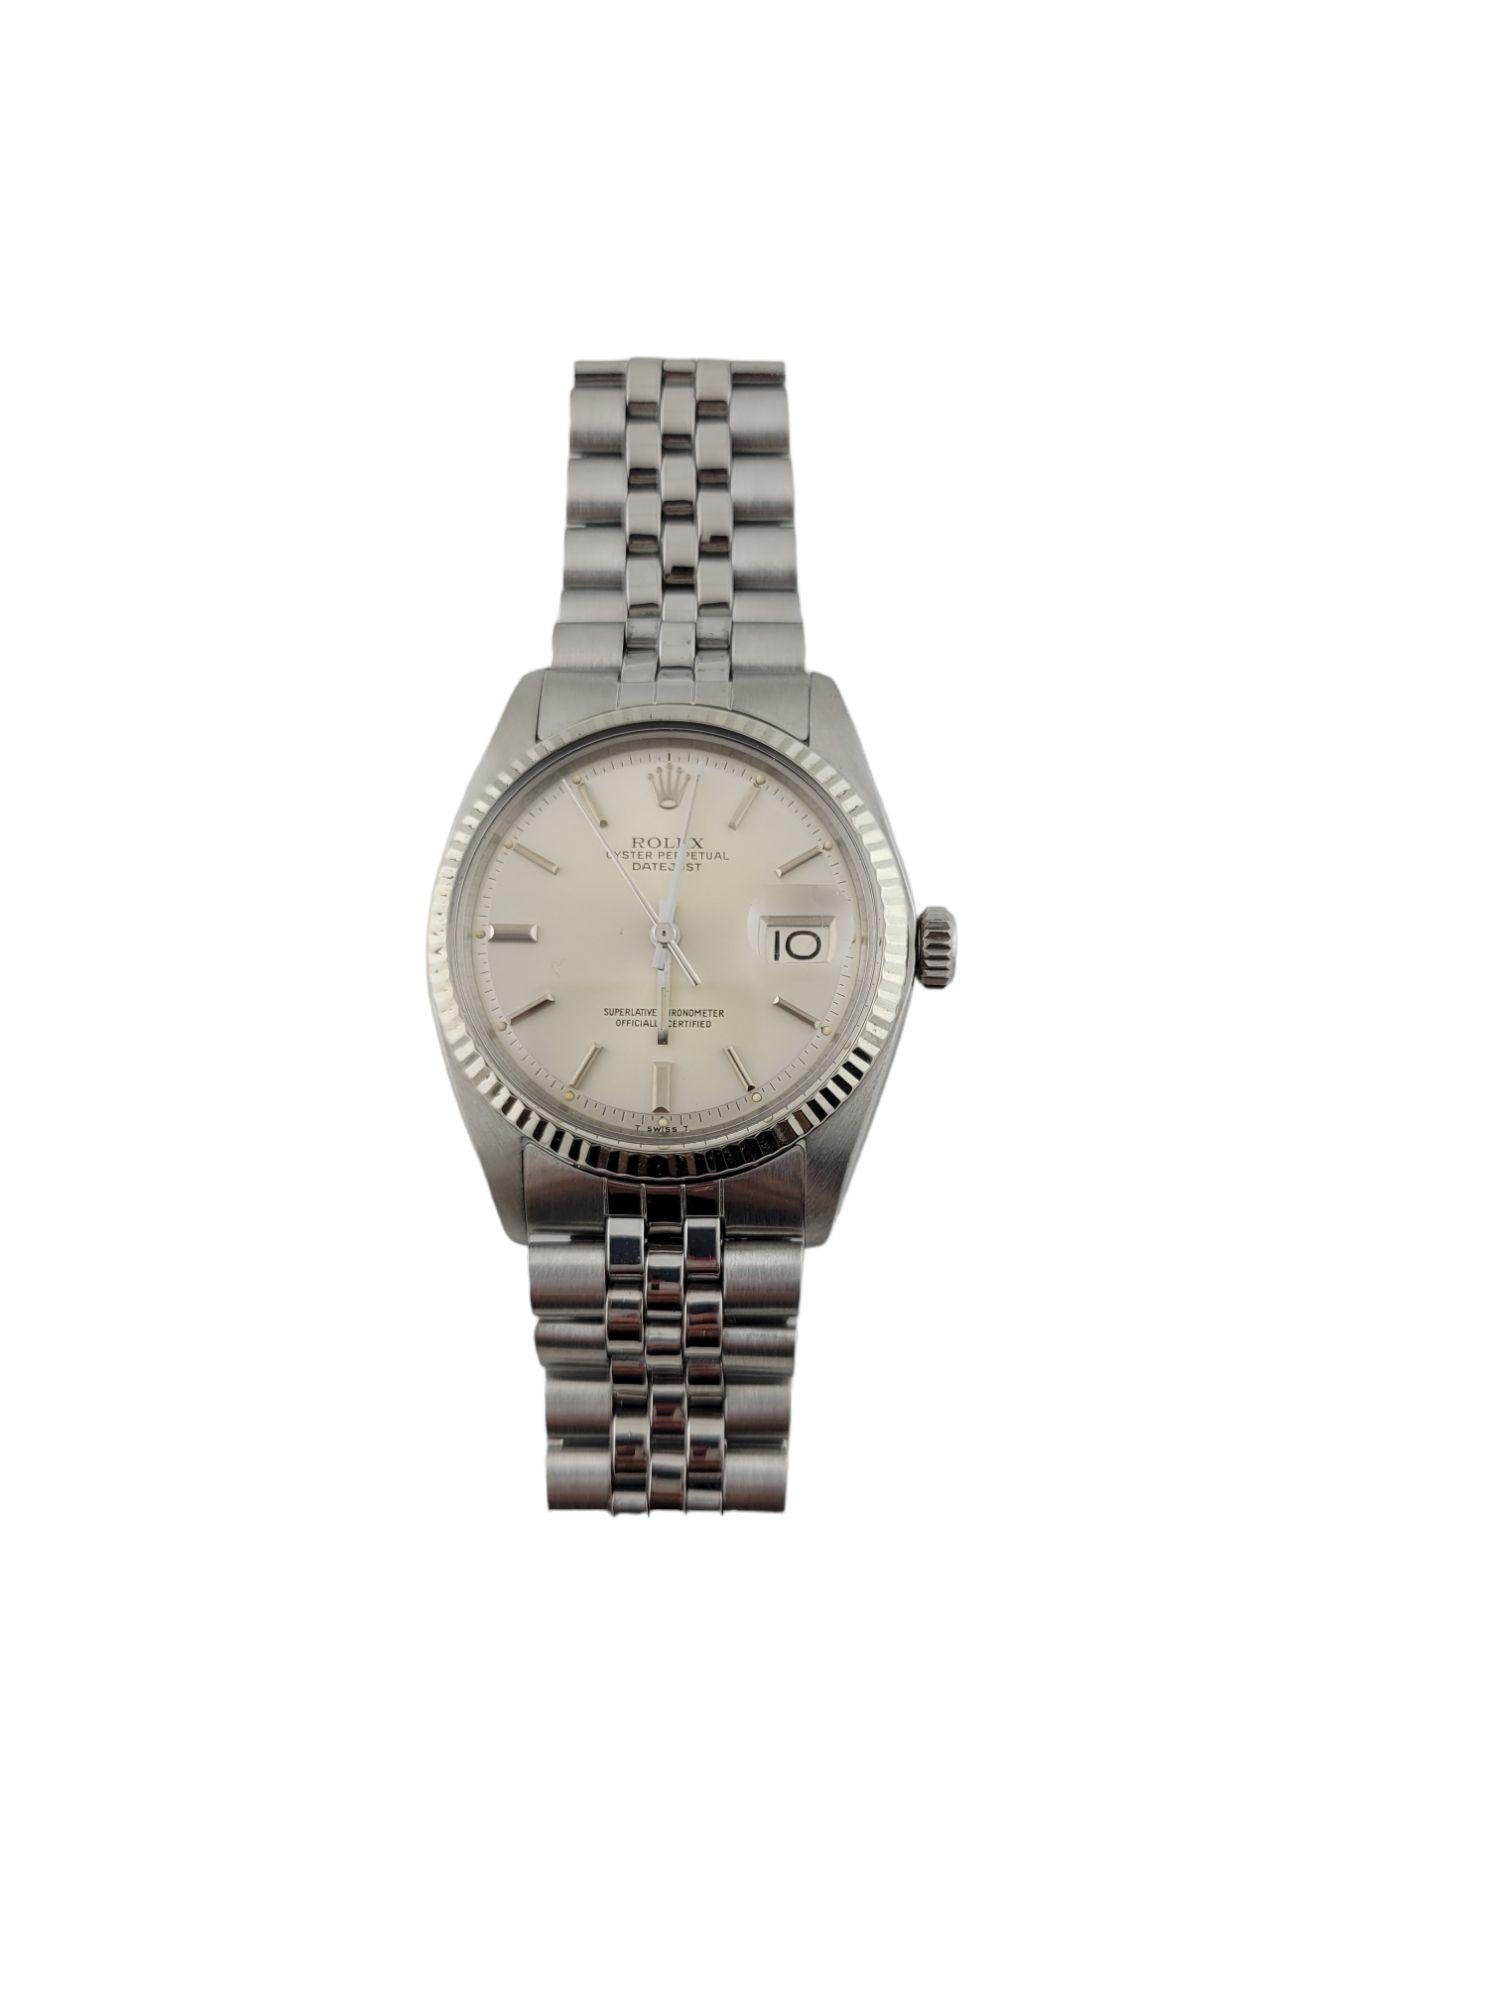 1958 Rolex Datejust 1601 Men's Watch Stainless Silver Dial 1601 3